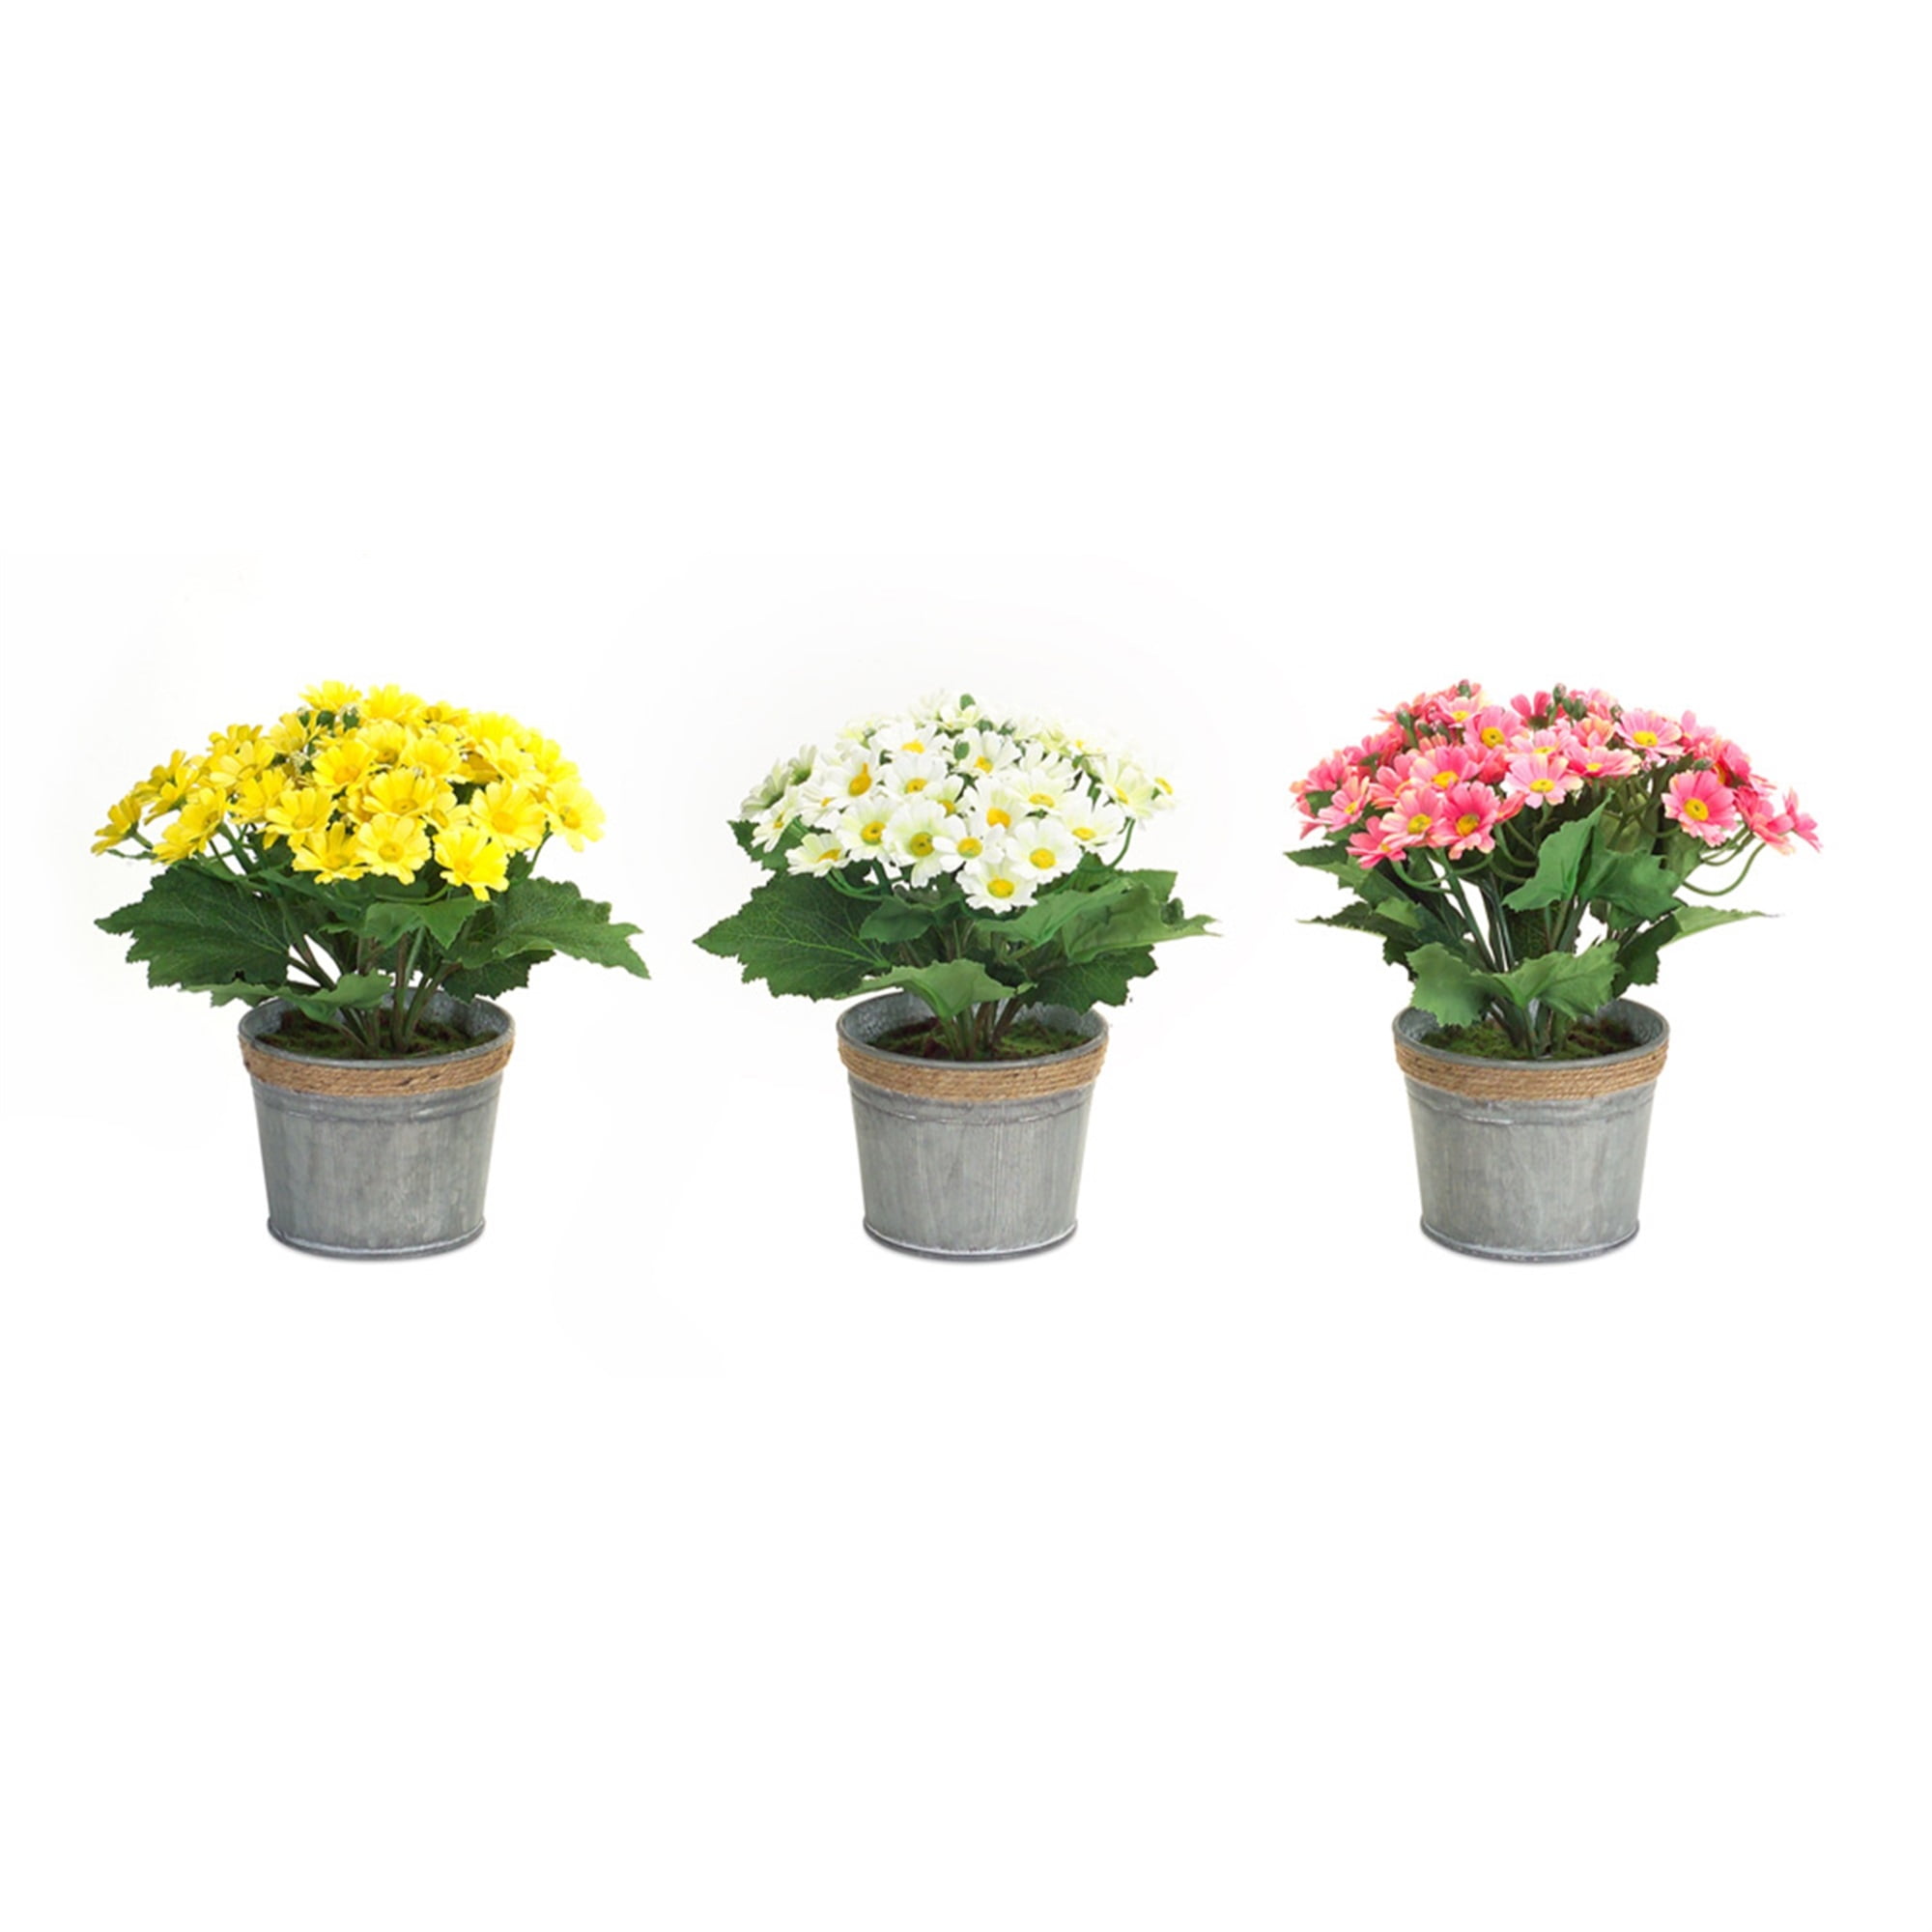 Potted Daisies (Set of 3) 9.5"H Polyester/Tin(sold out)